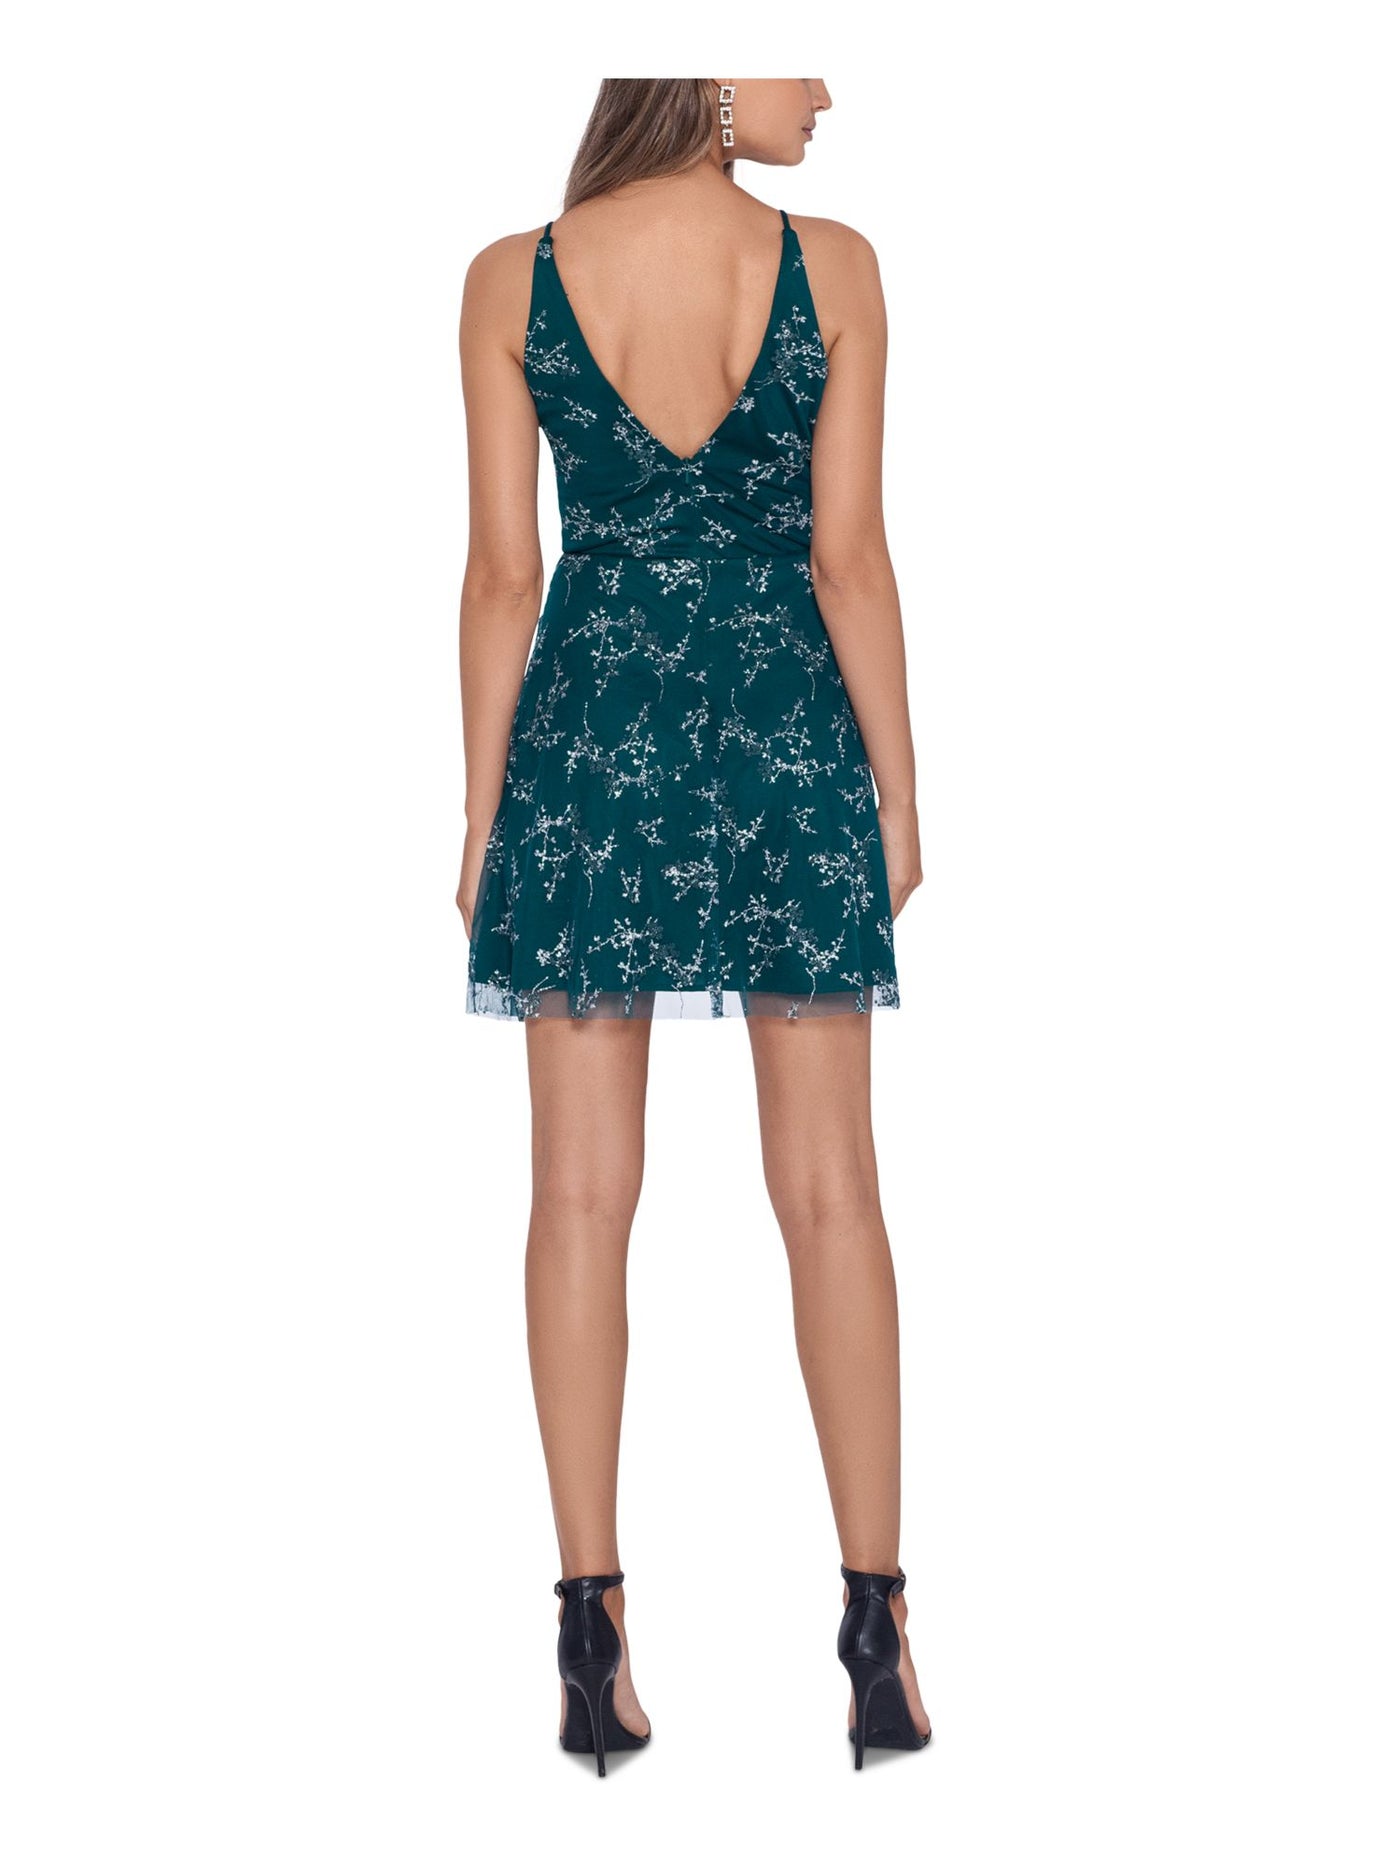 BLONDIE NITES Womens Green Embellished Zippered Sleeveless V Neck Short Party Fit + Flare Dress Juniors 5